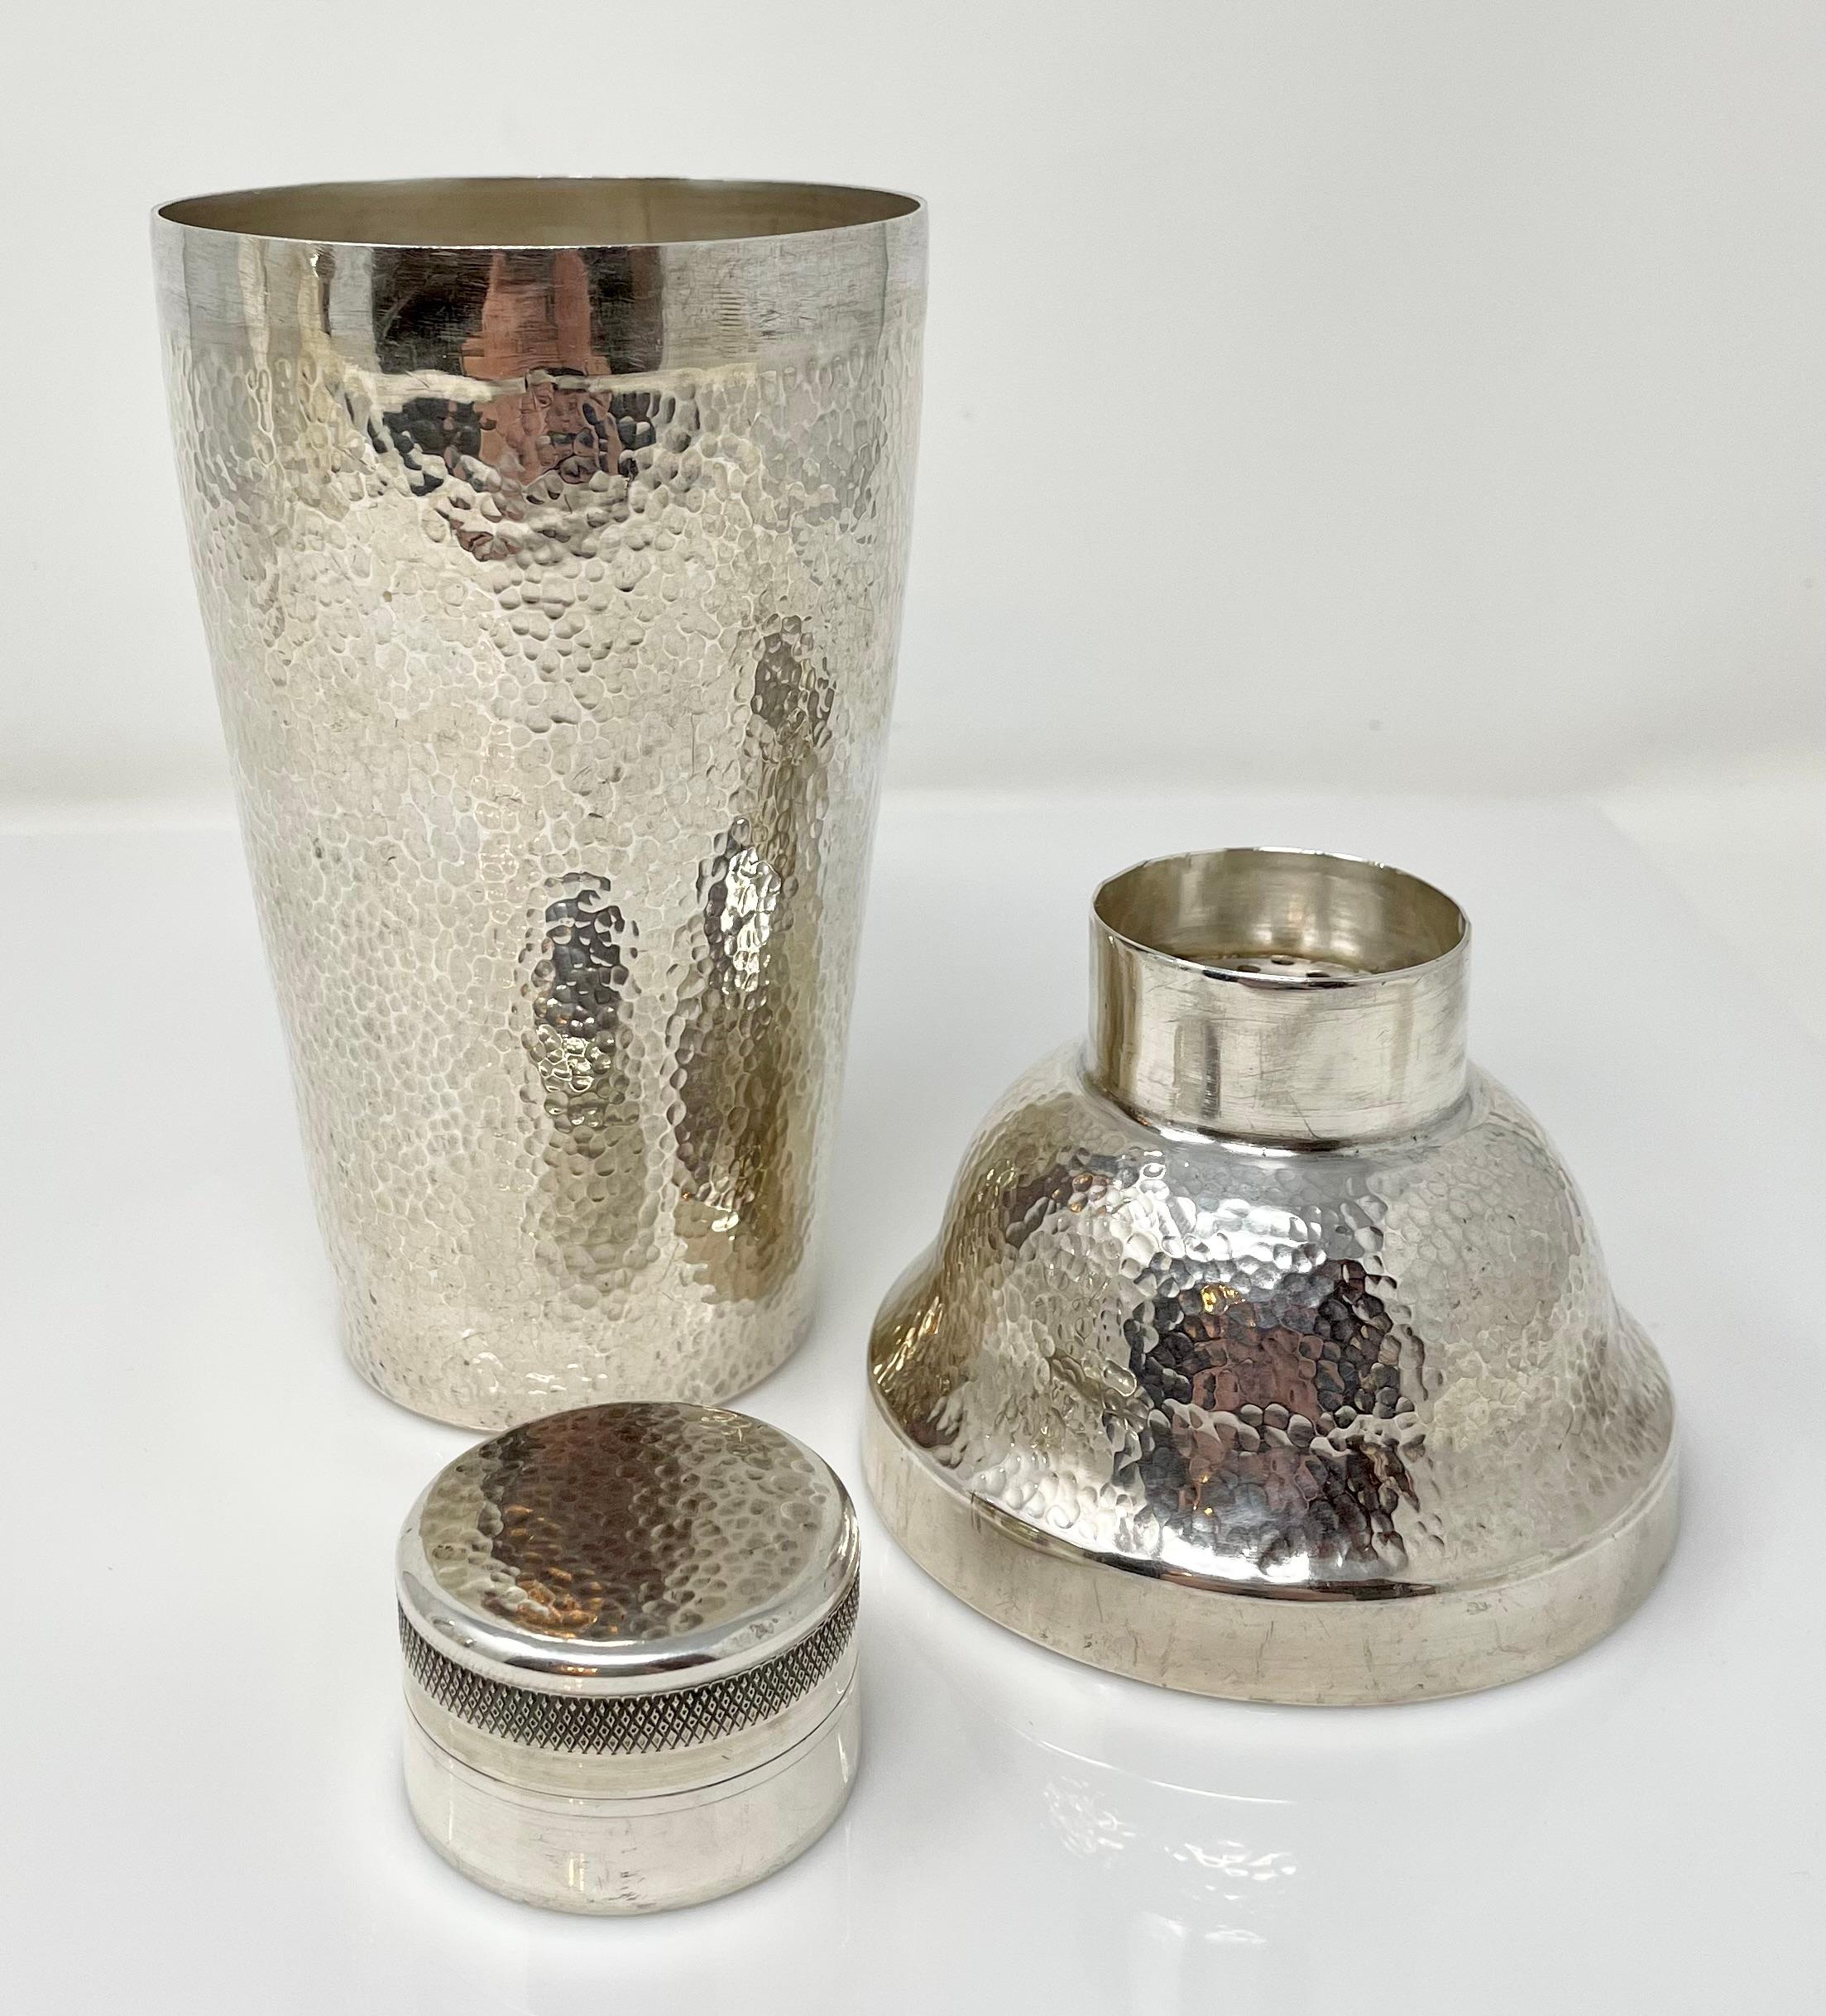 Antique heavy Columbian sterling silver (90%) hammered cocktail shaker, circa 1900-1910. Handmade and hallmarked, 13.20 troy ounces.